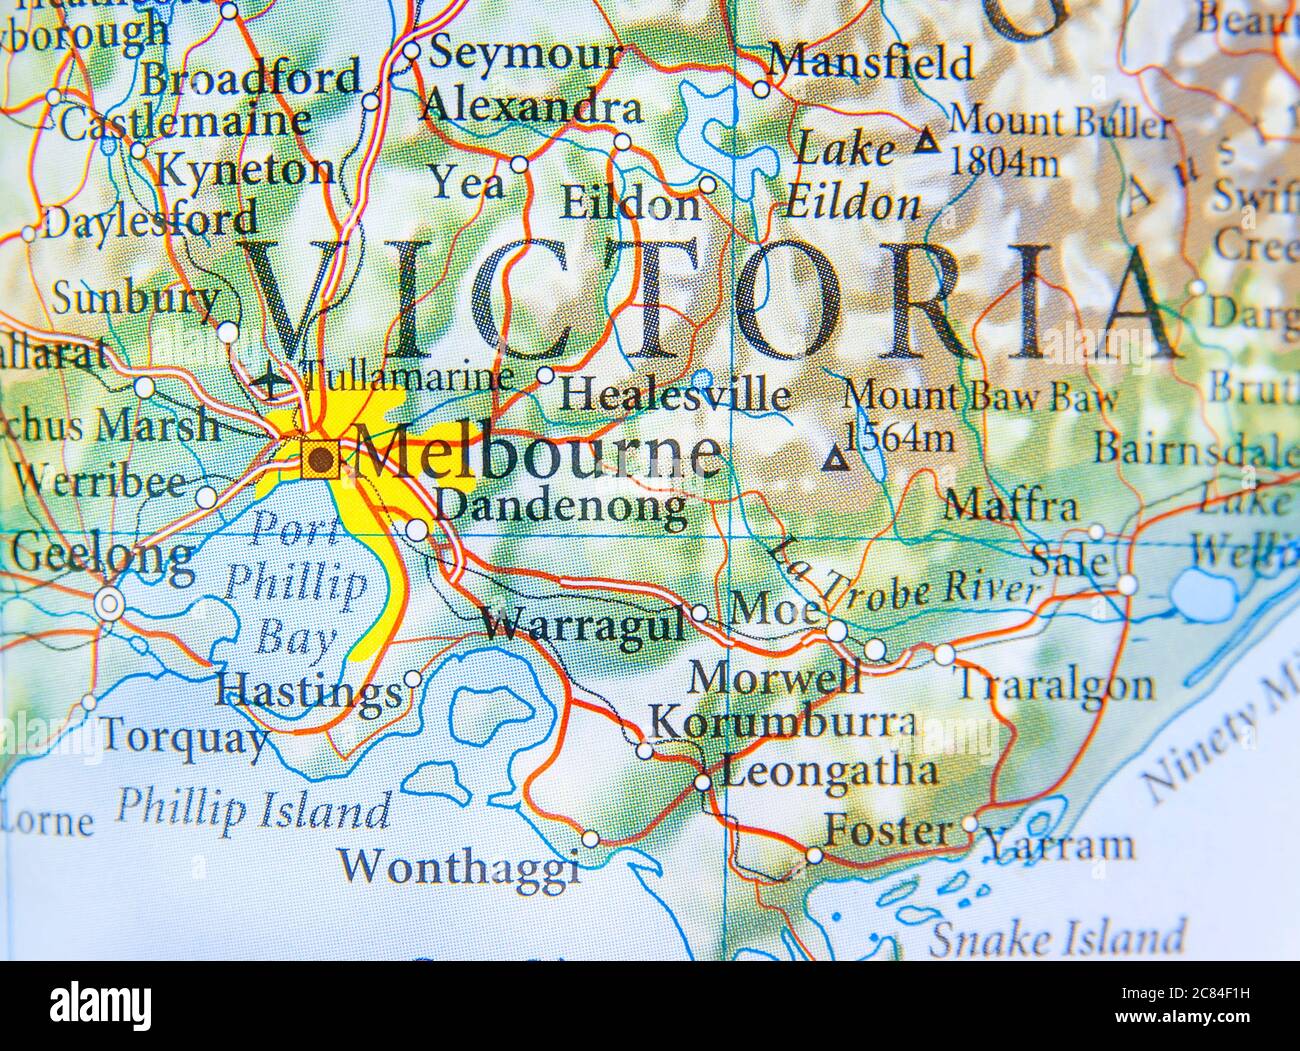 Geographic Map Of Australia With Melbourne City 2C84F1H 